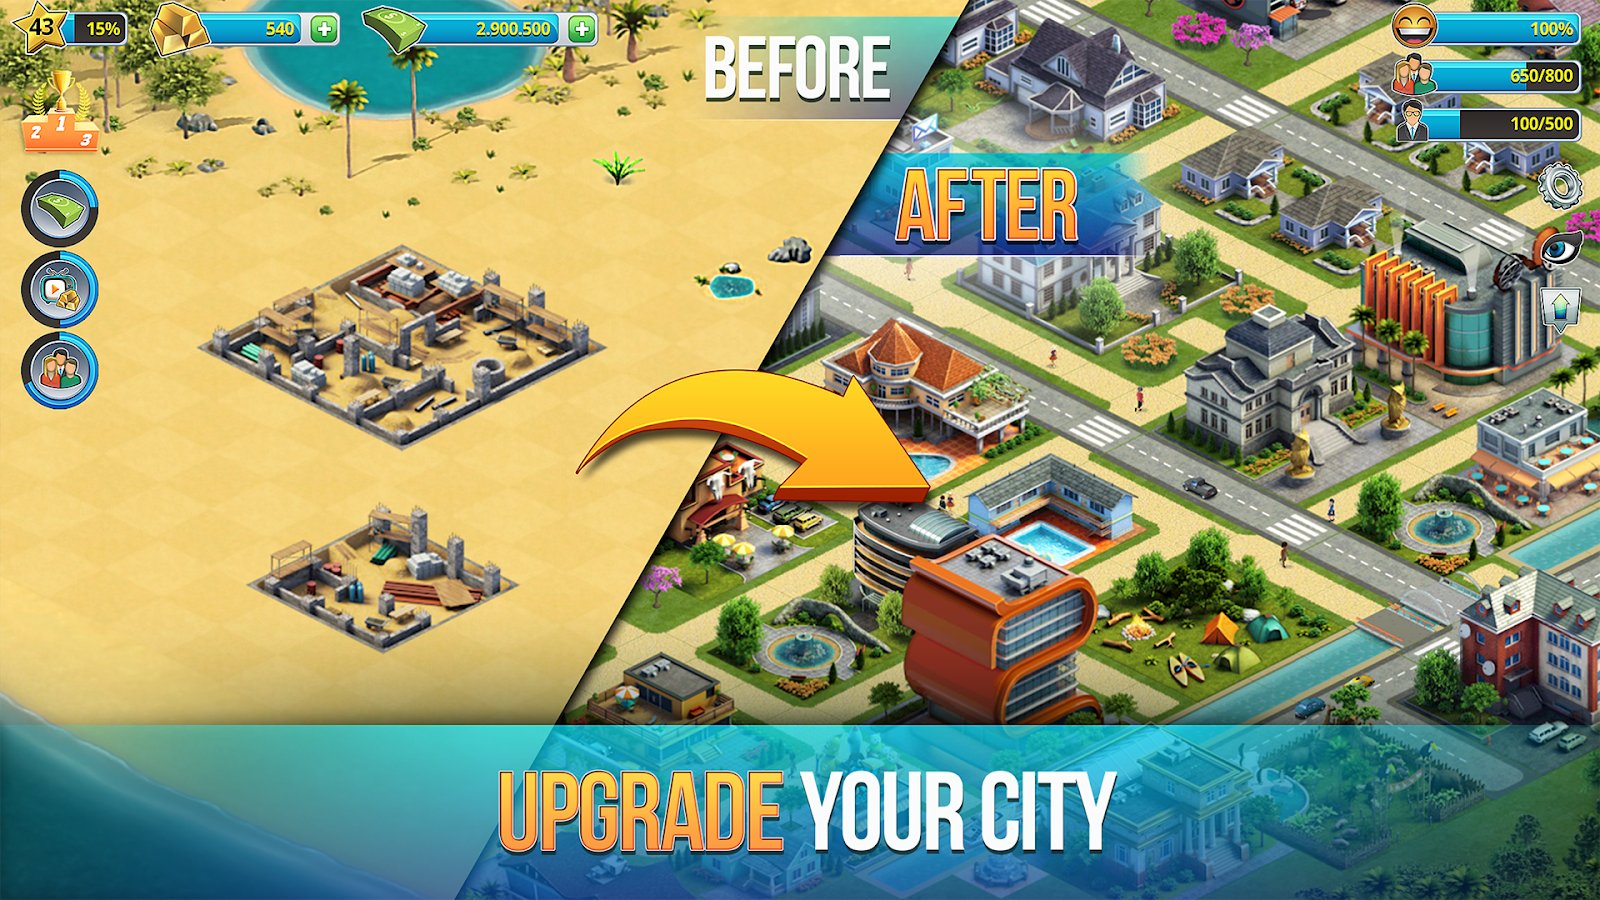 City Island: Collections download the last version for iphone